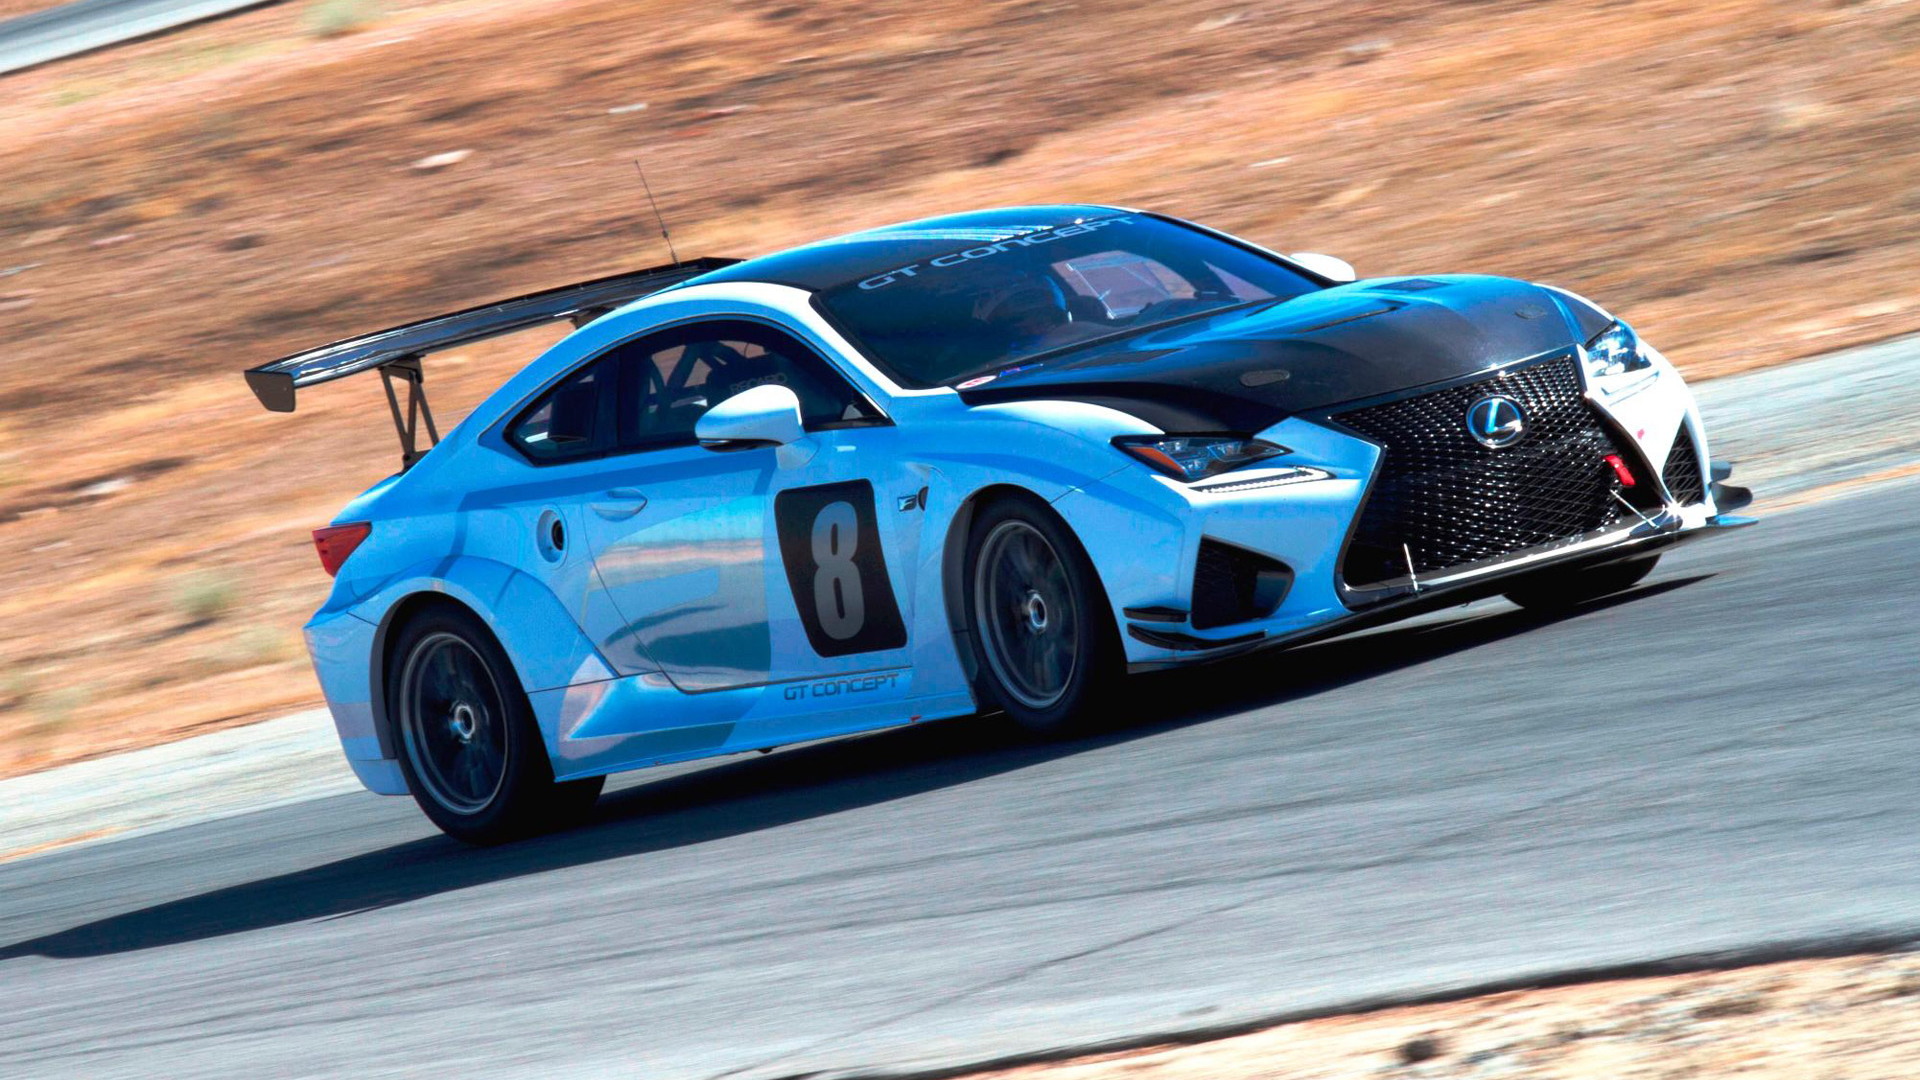 Lexus RC F GT concept competing at the 2015 Pikes Peak Hill Climb